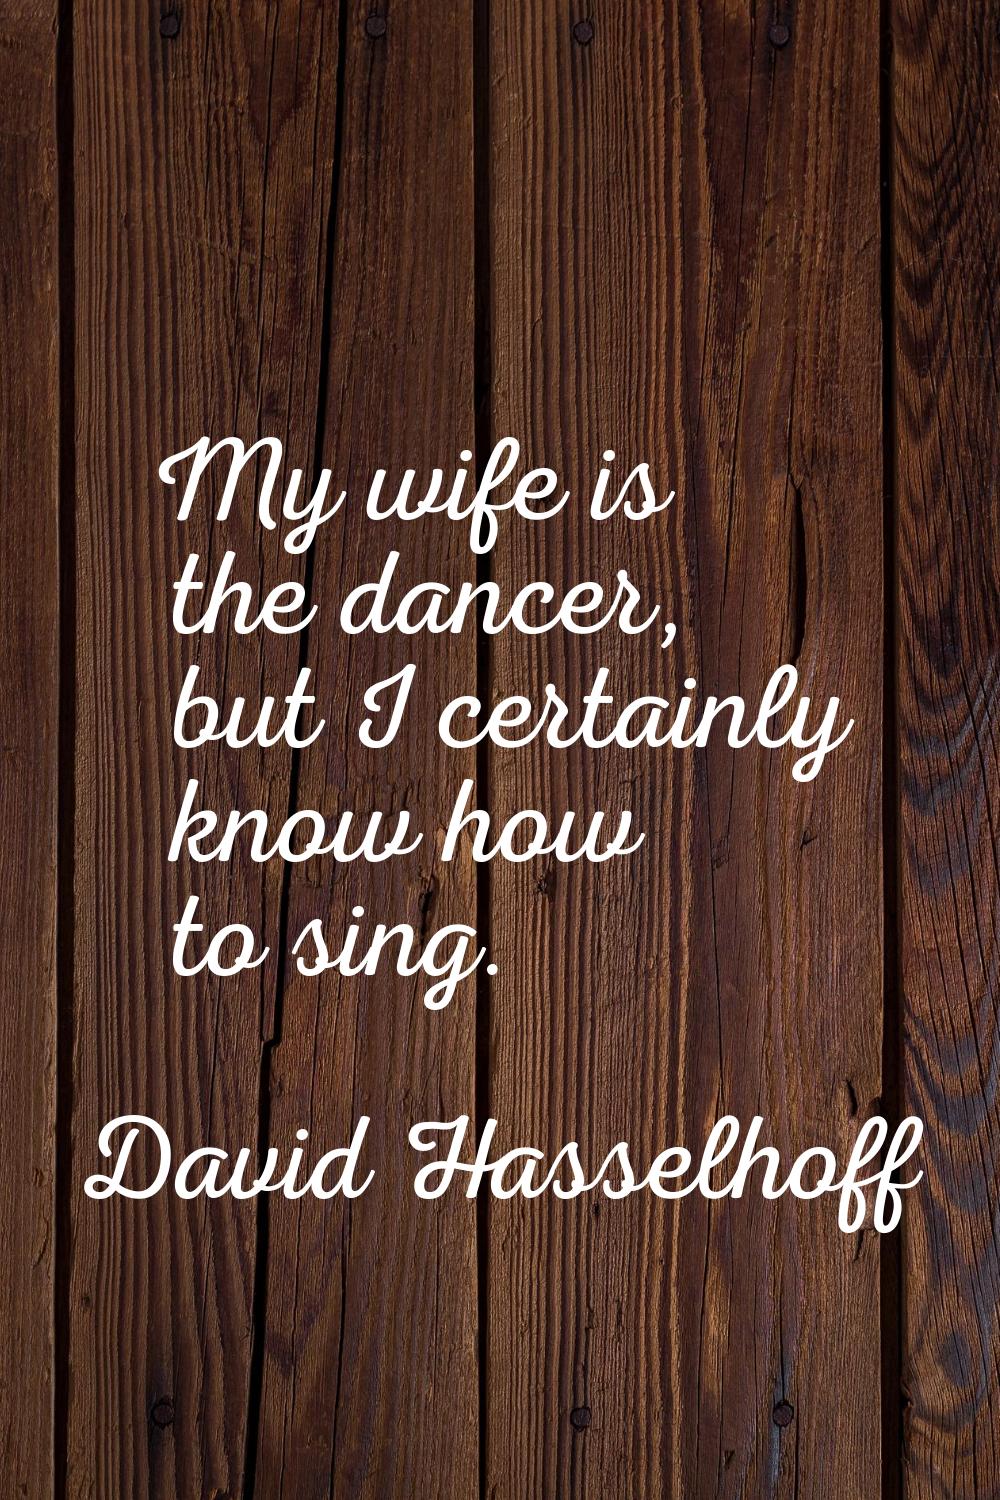 My wife is the dancer, but I certainly know how to sing.